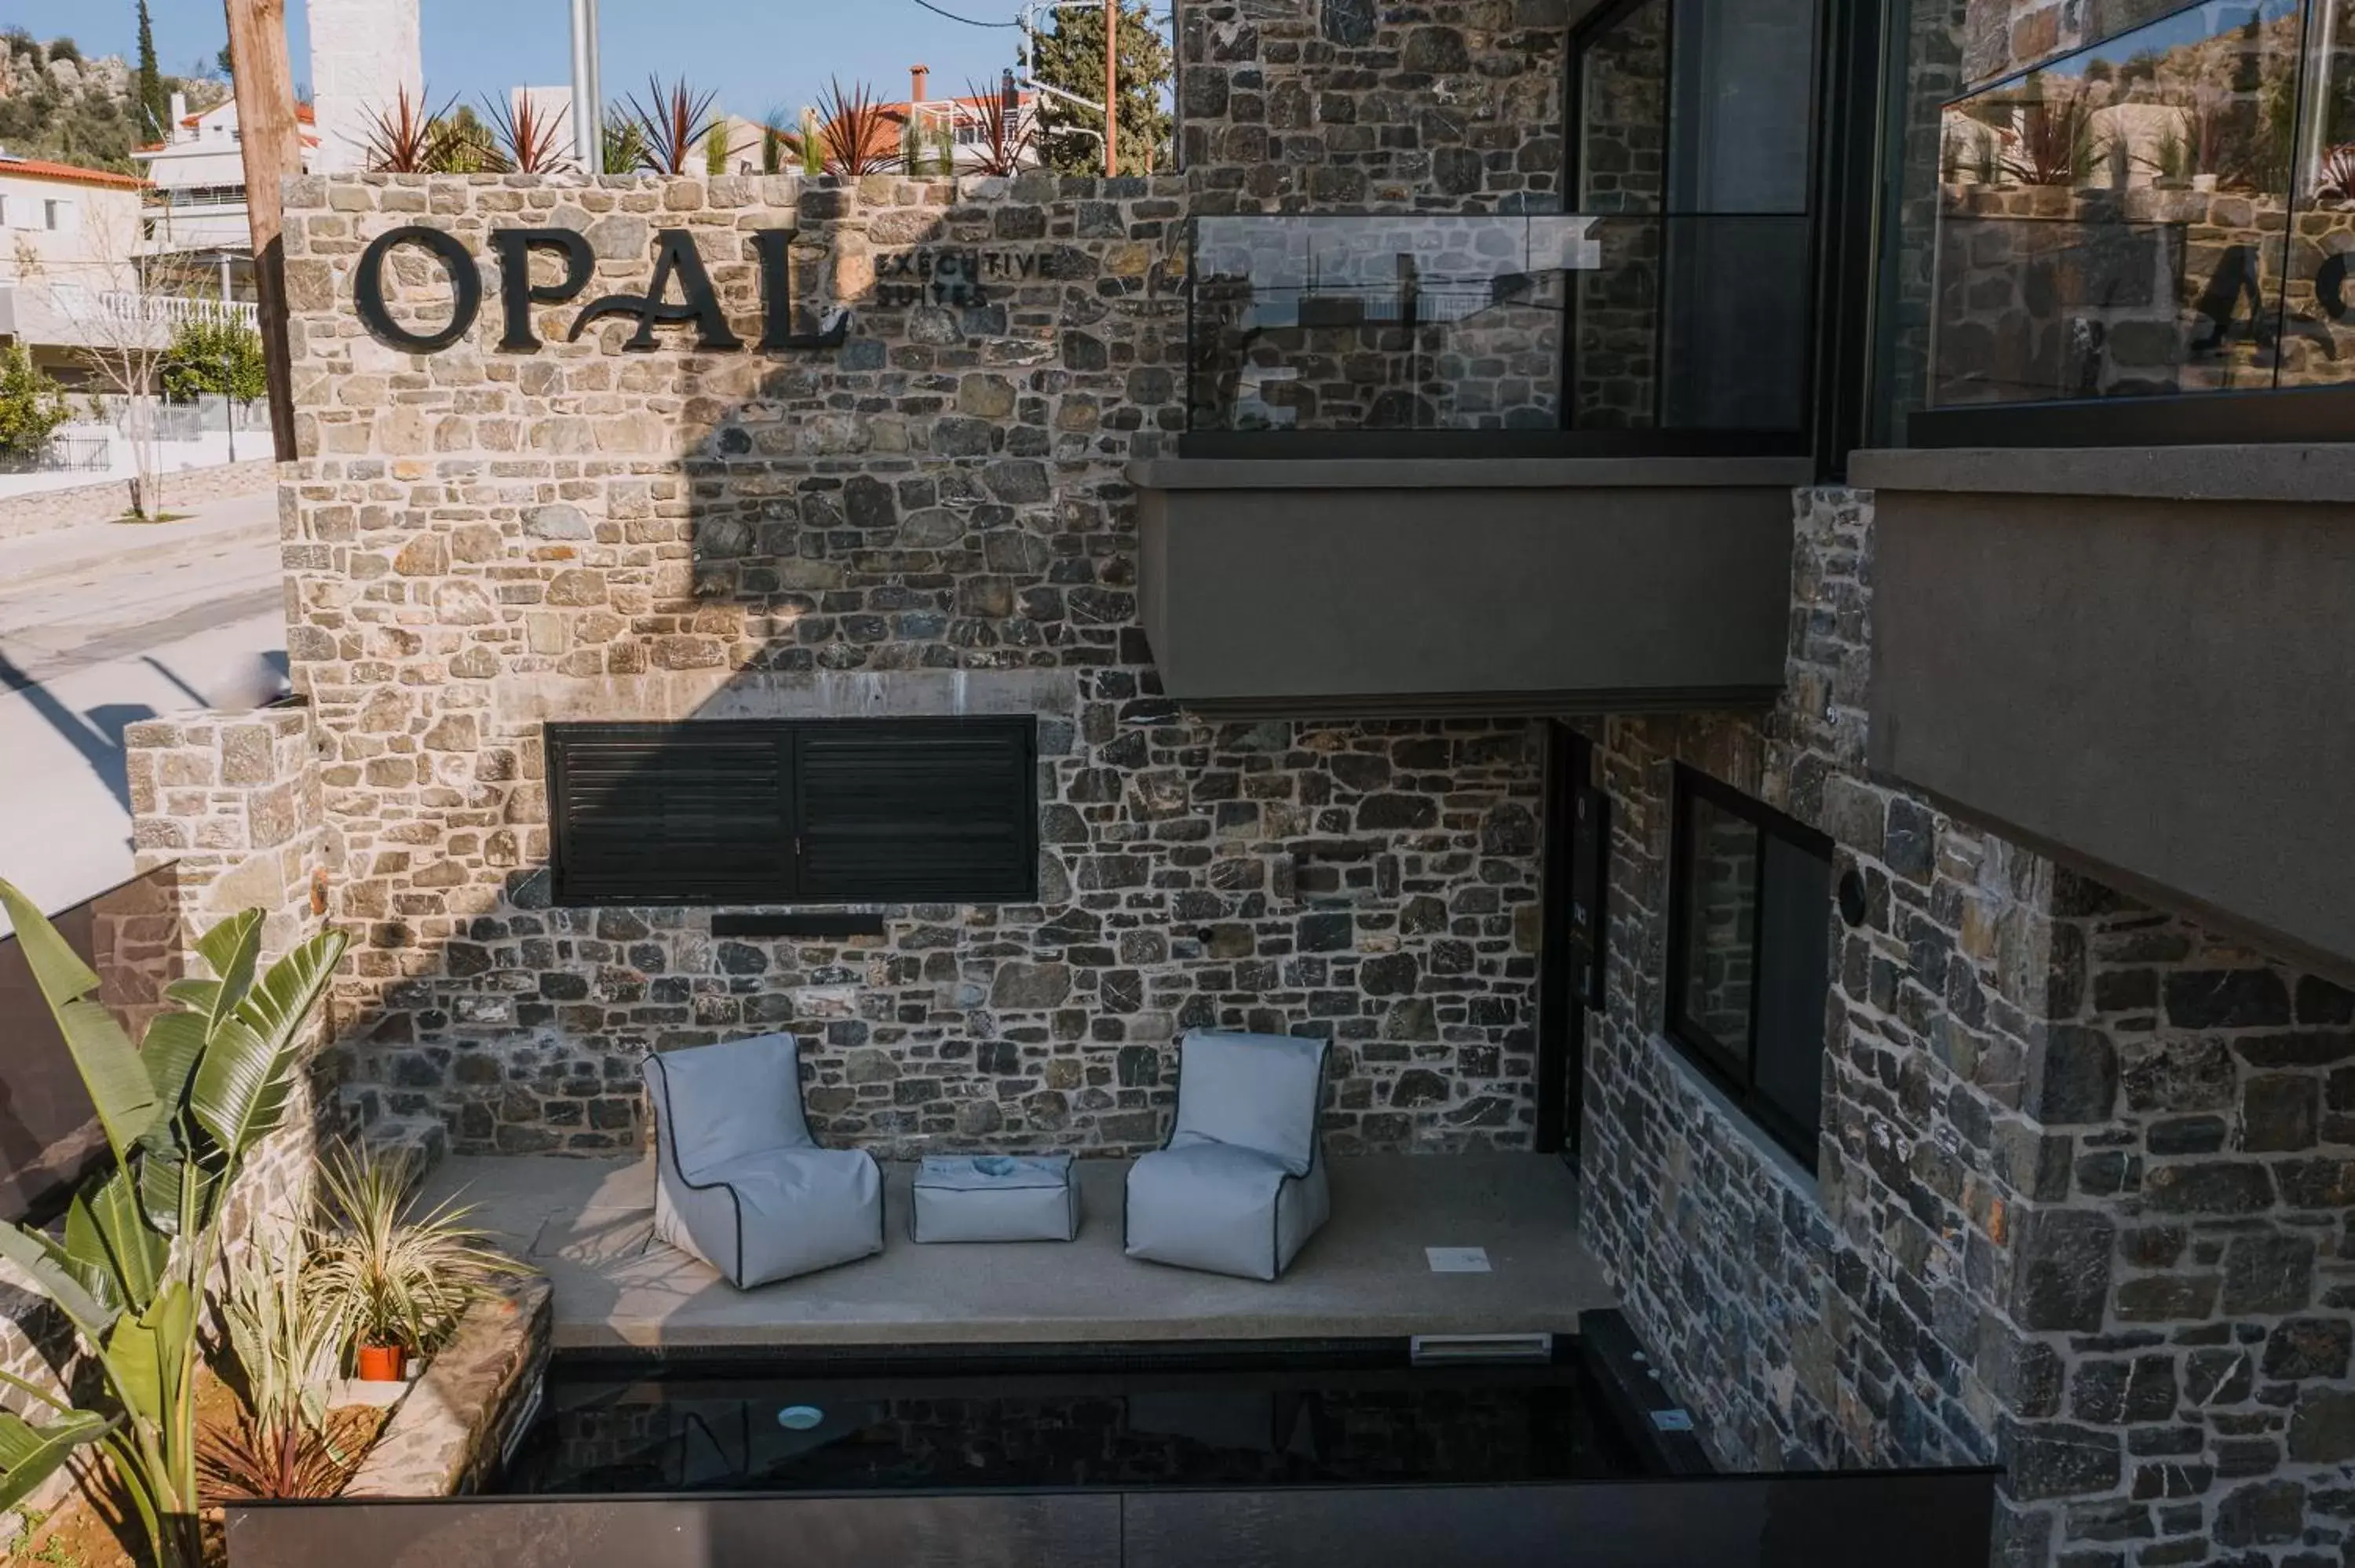 Property building in Opal Executive Suites